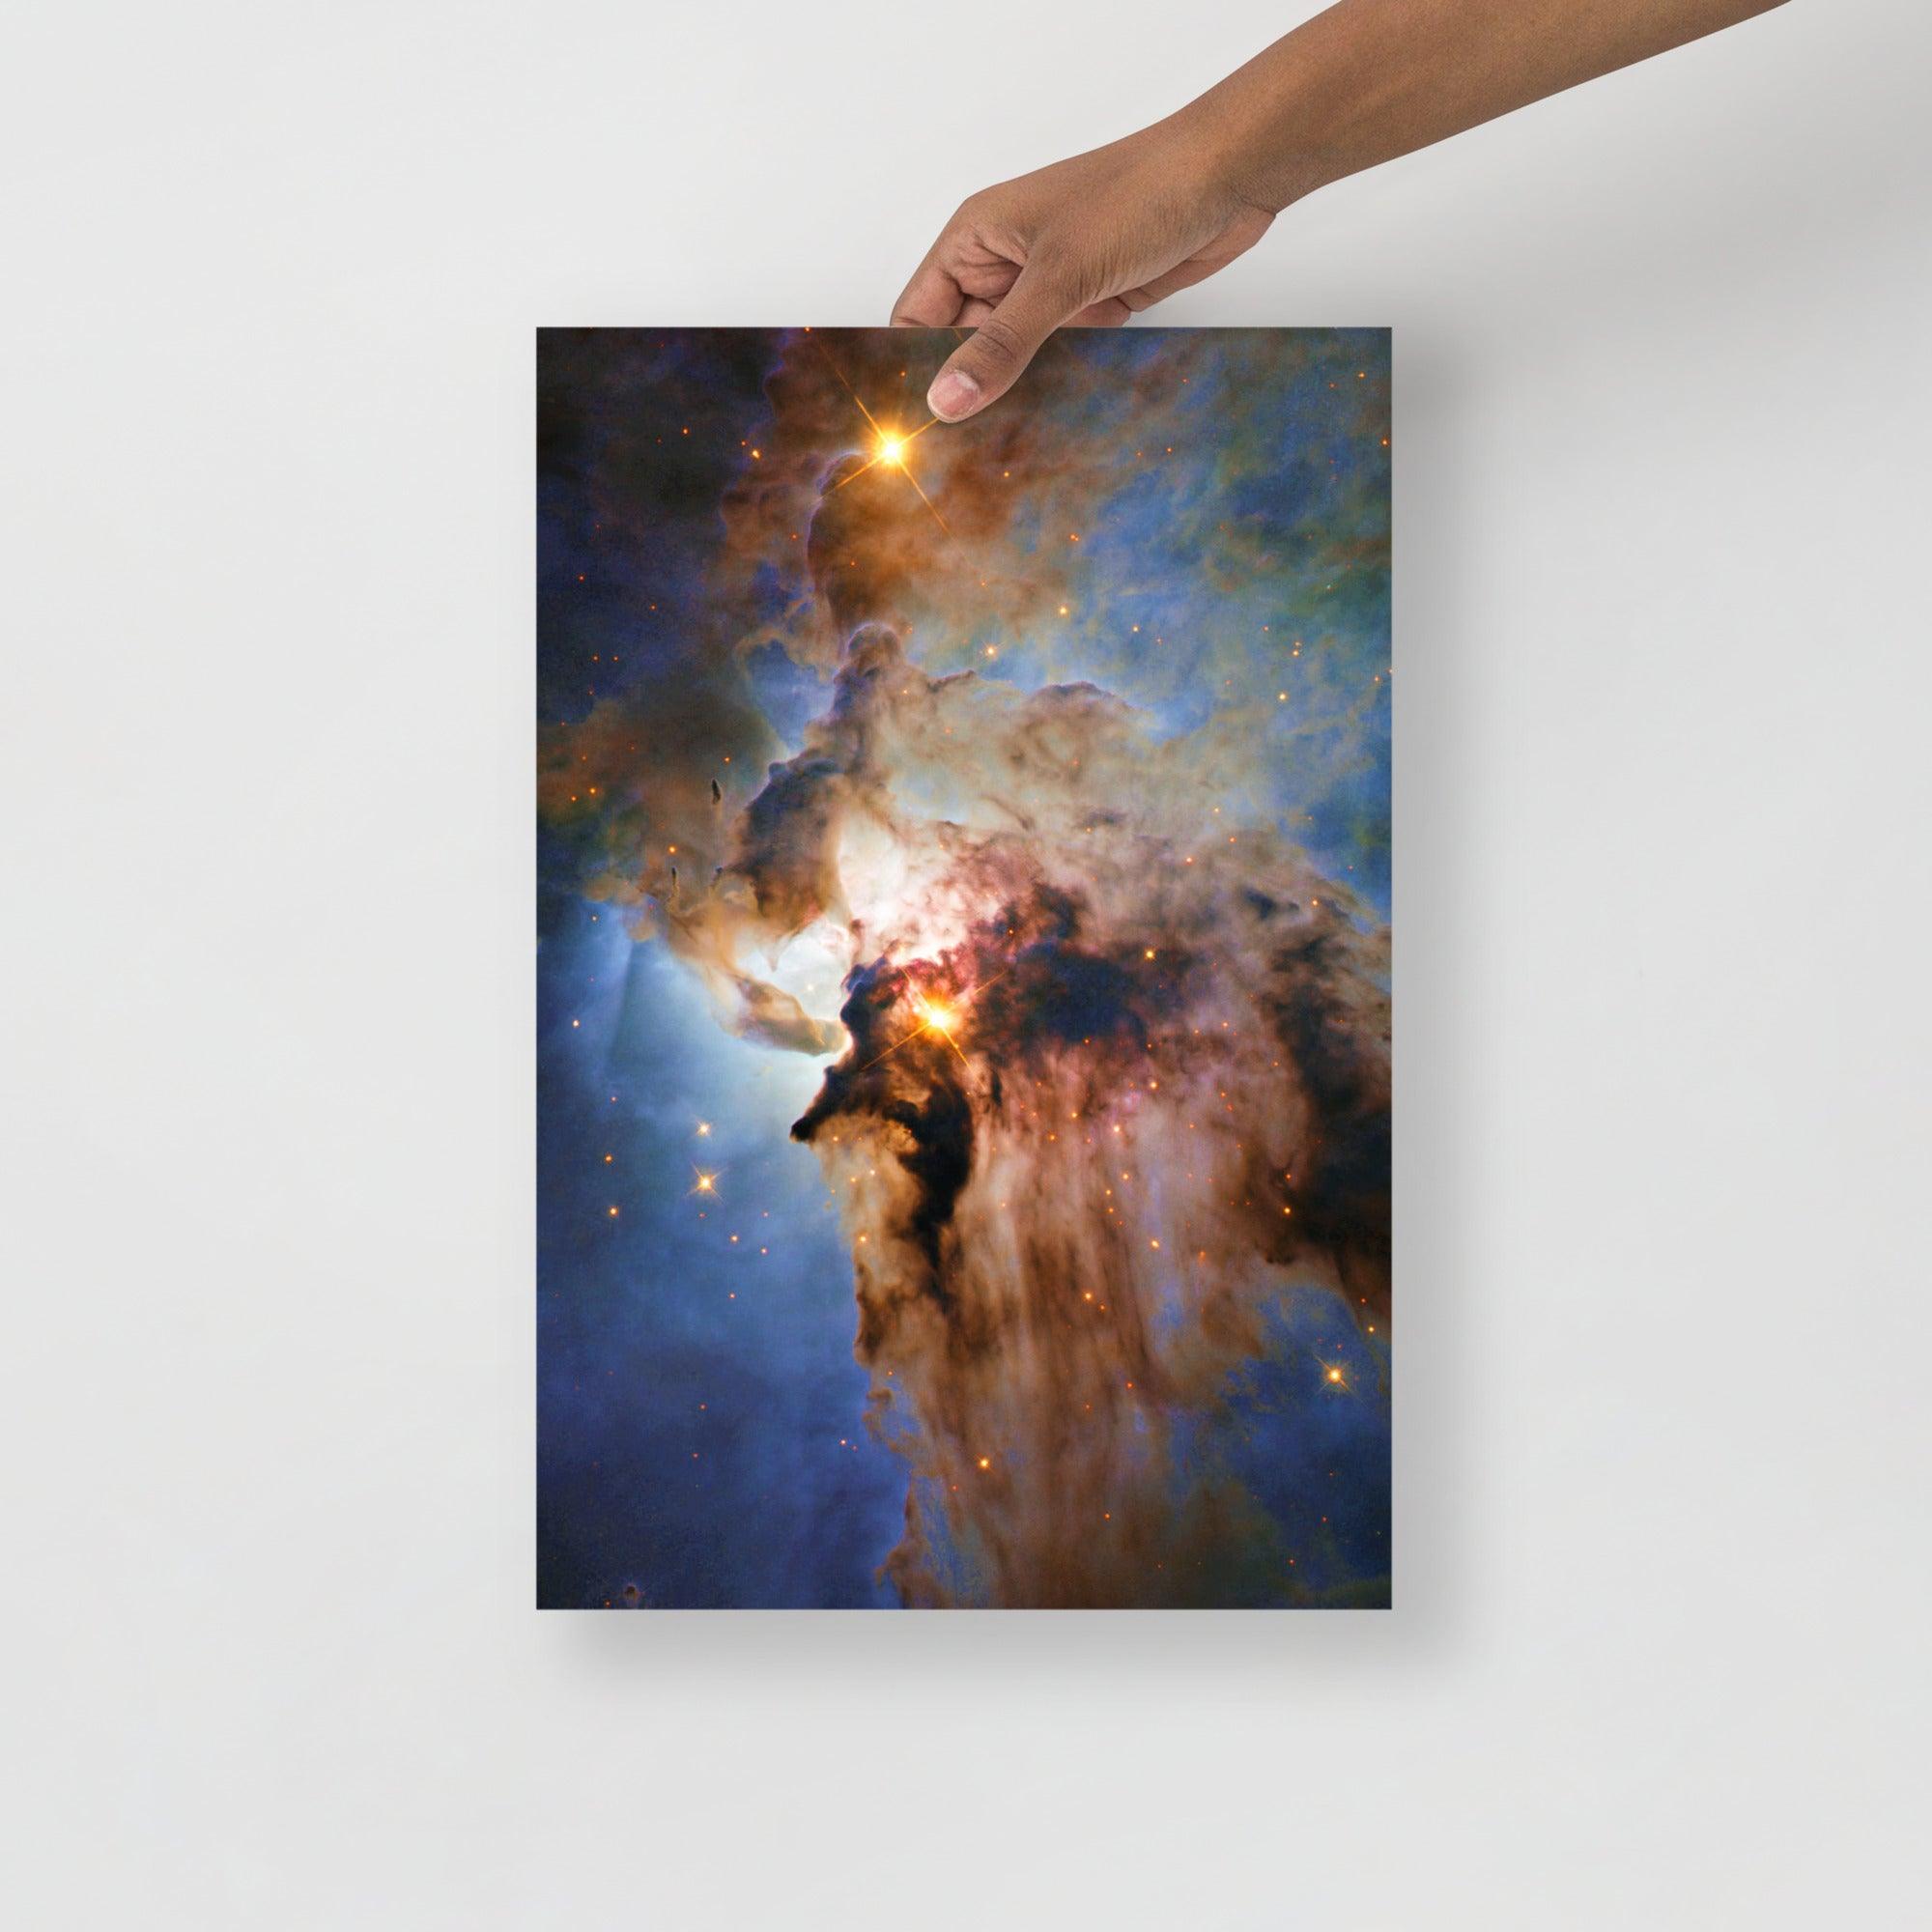 A Lagoon Nebula by Hubble Space Telescope poster on a plain backdrop in size 12x18”.